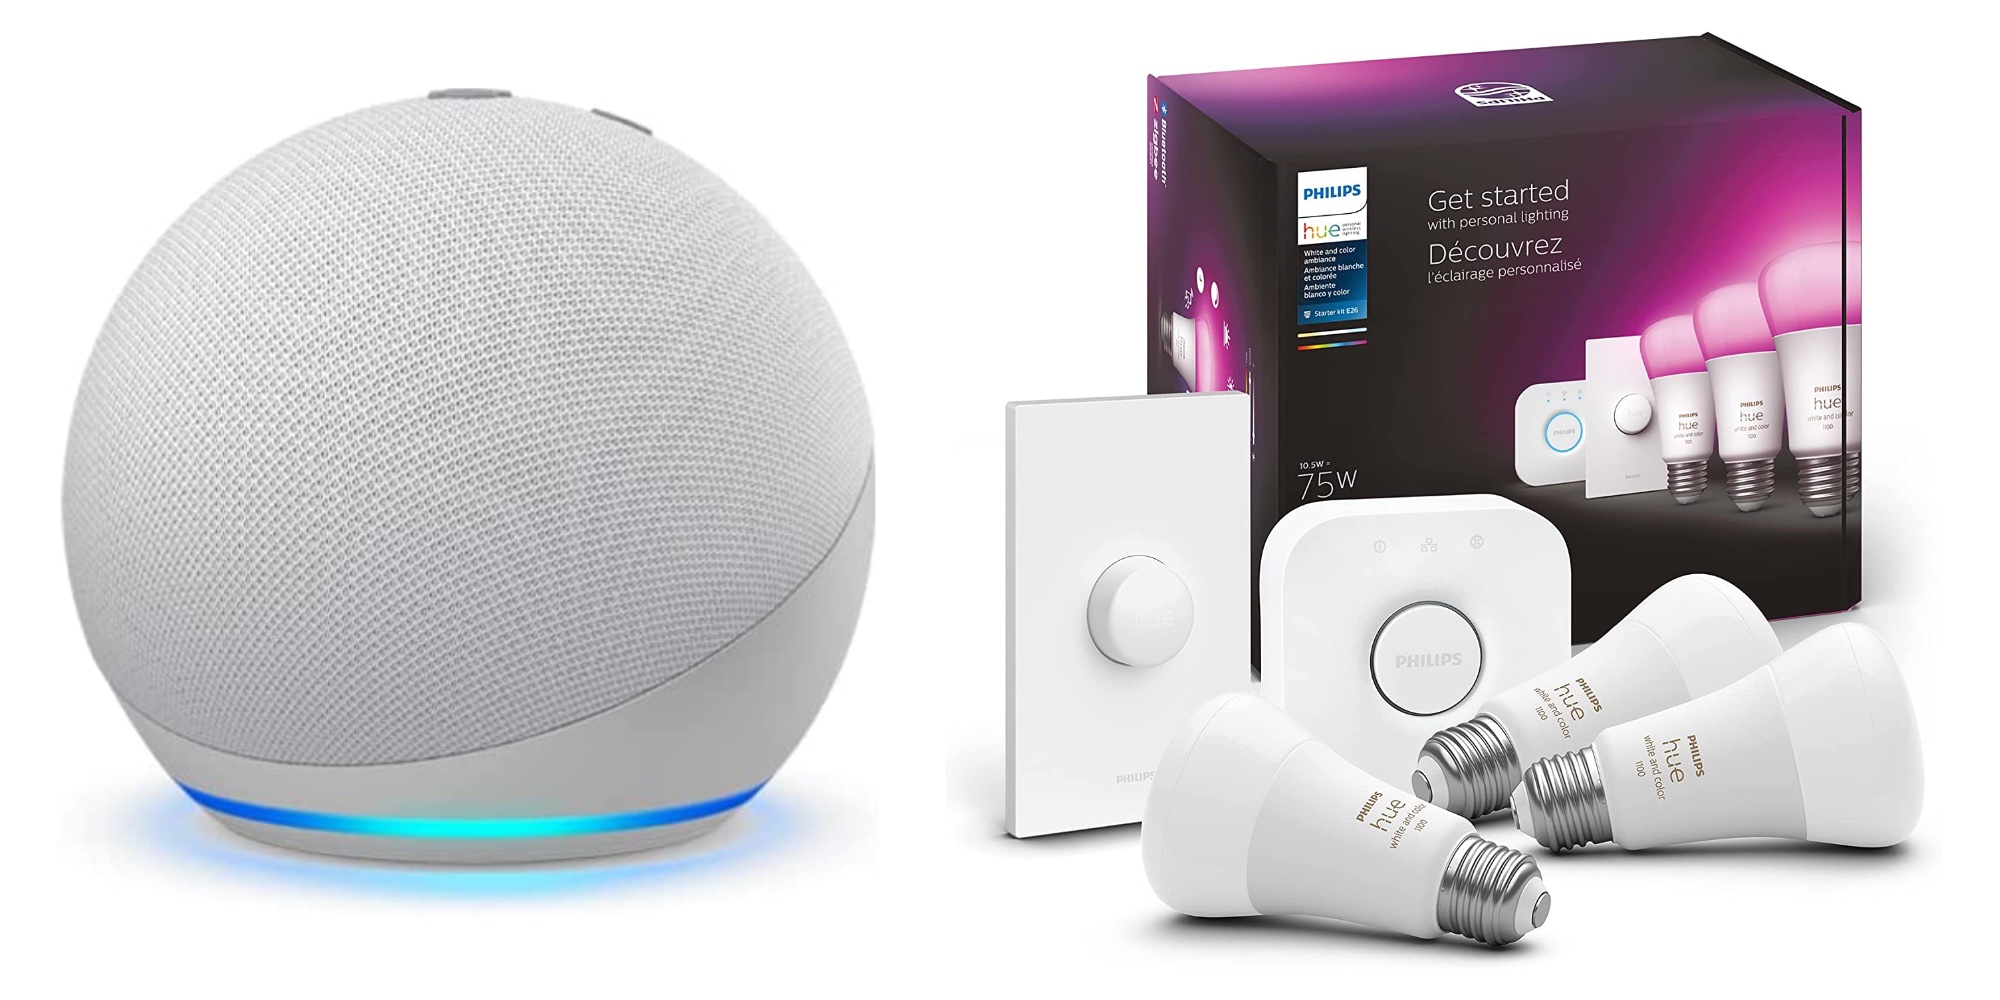 Bundle Philips Hue 3-bulb color starter kits with Echo Dots from